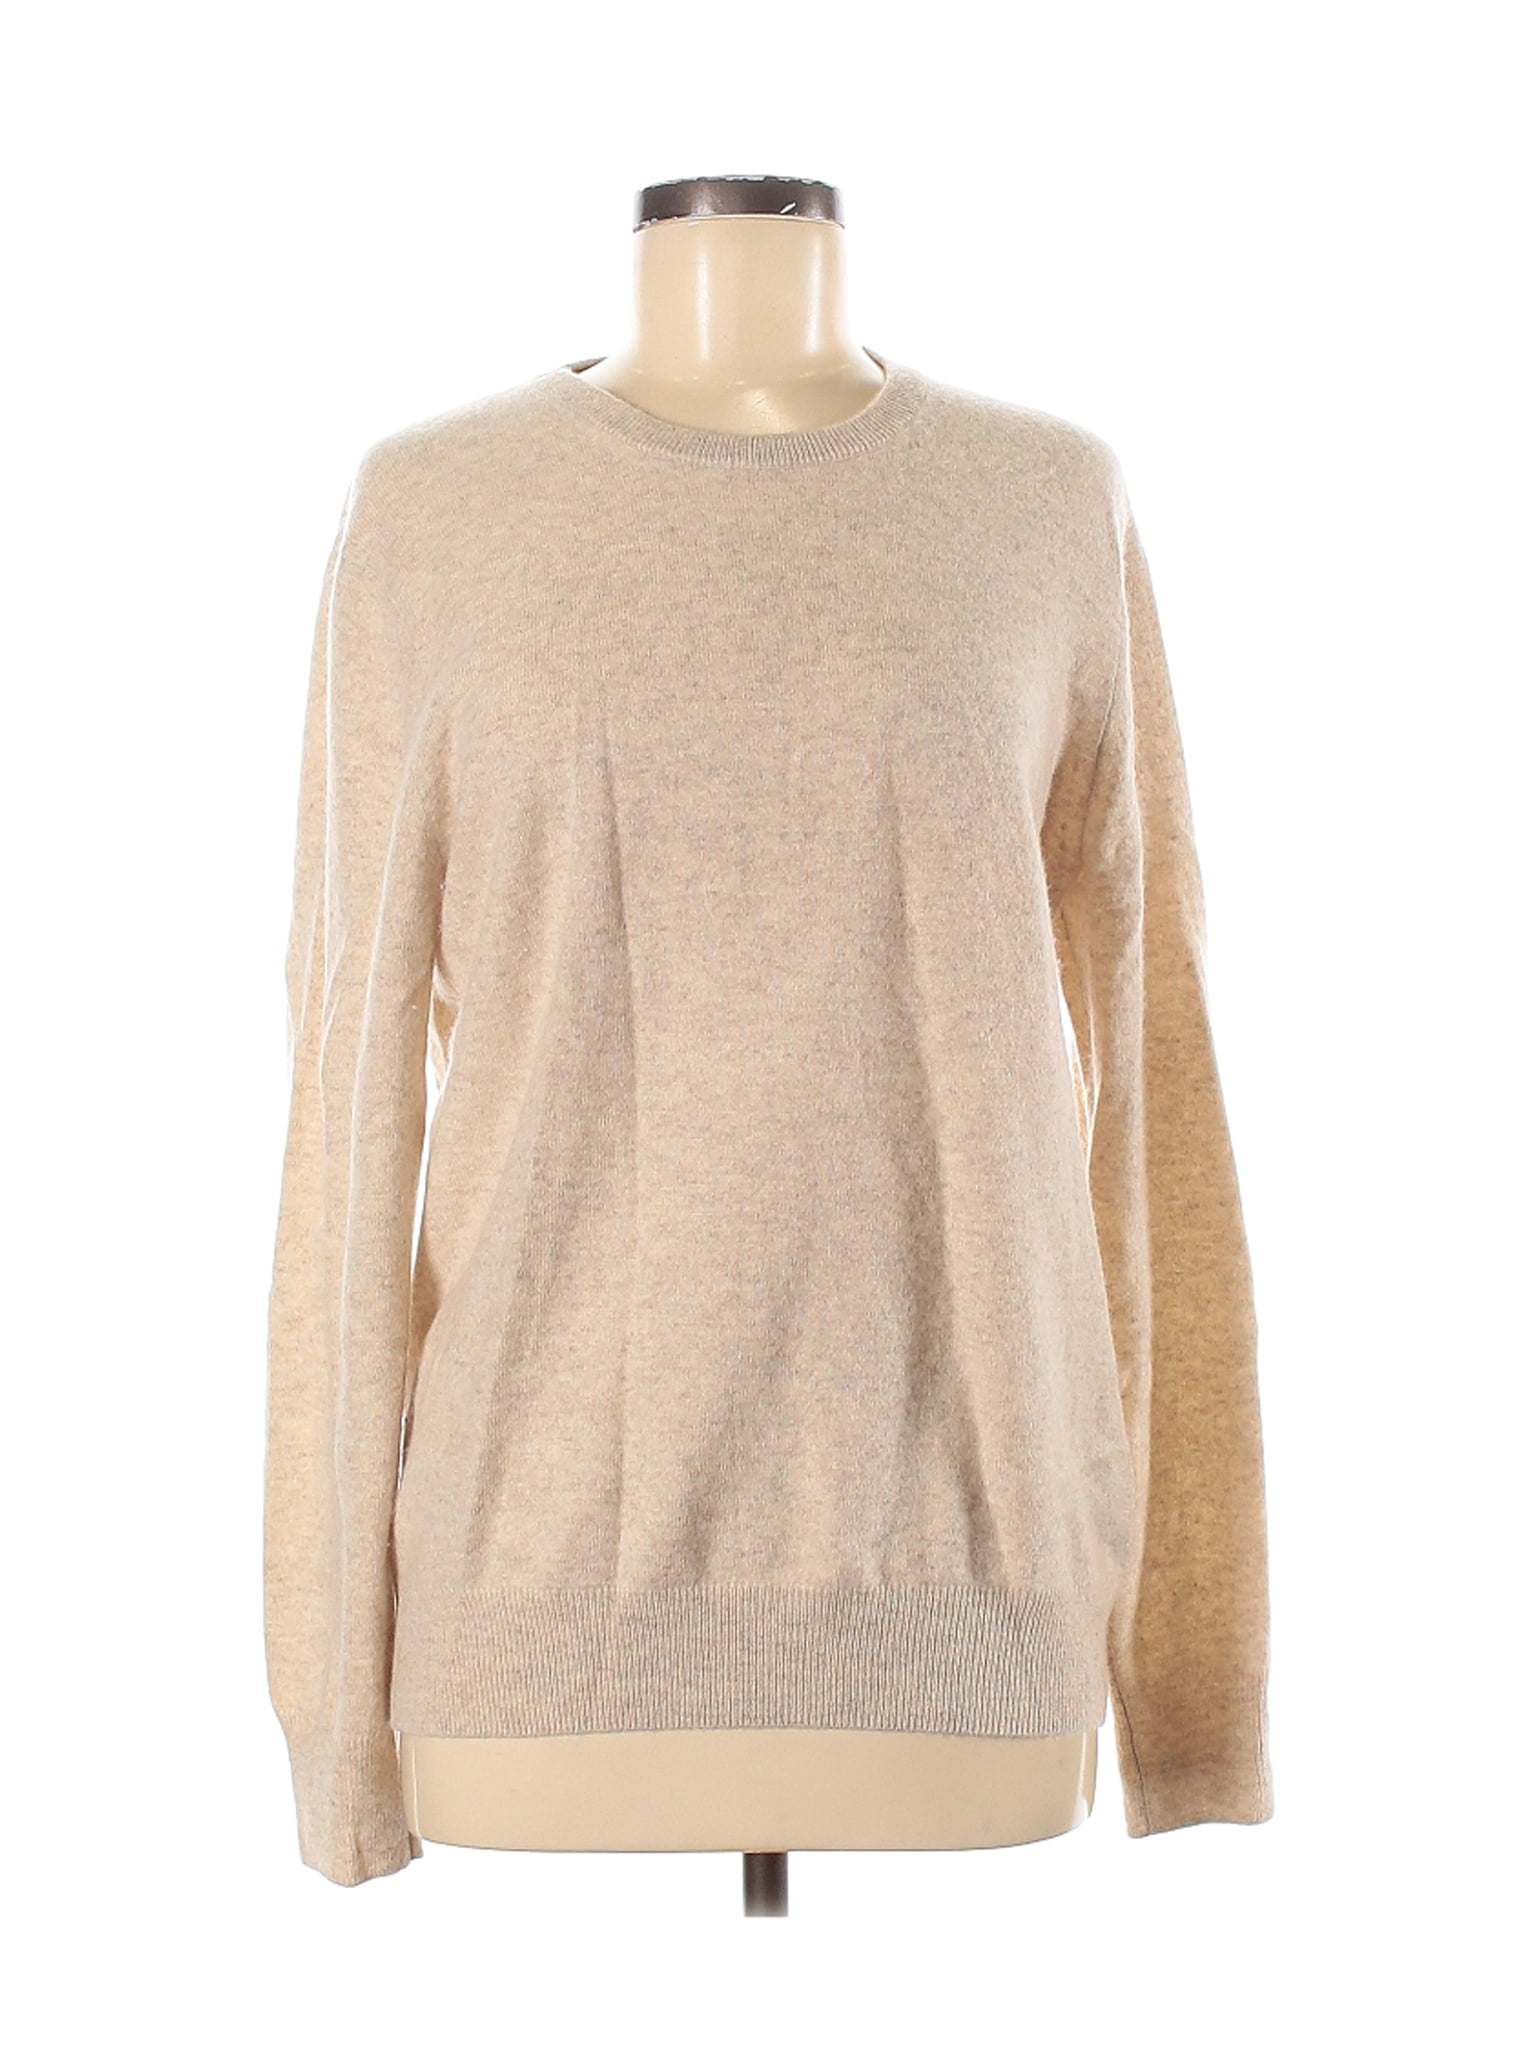 Naadam - Pre-Owned Naadam Women's Size M Cashmere Pullover Sweater ...